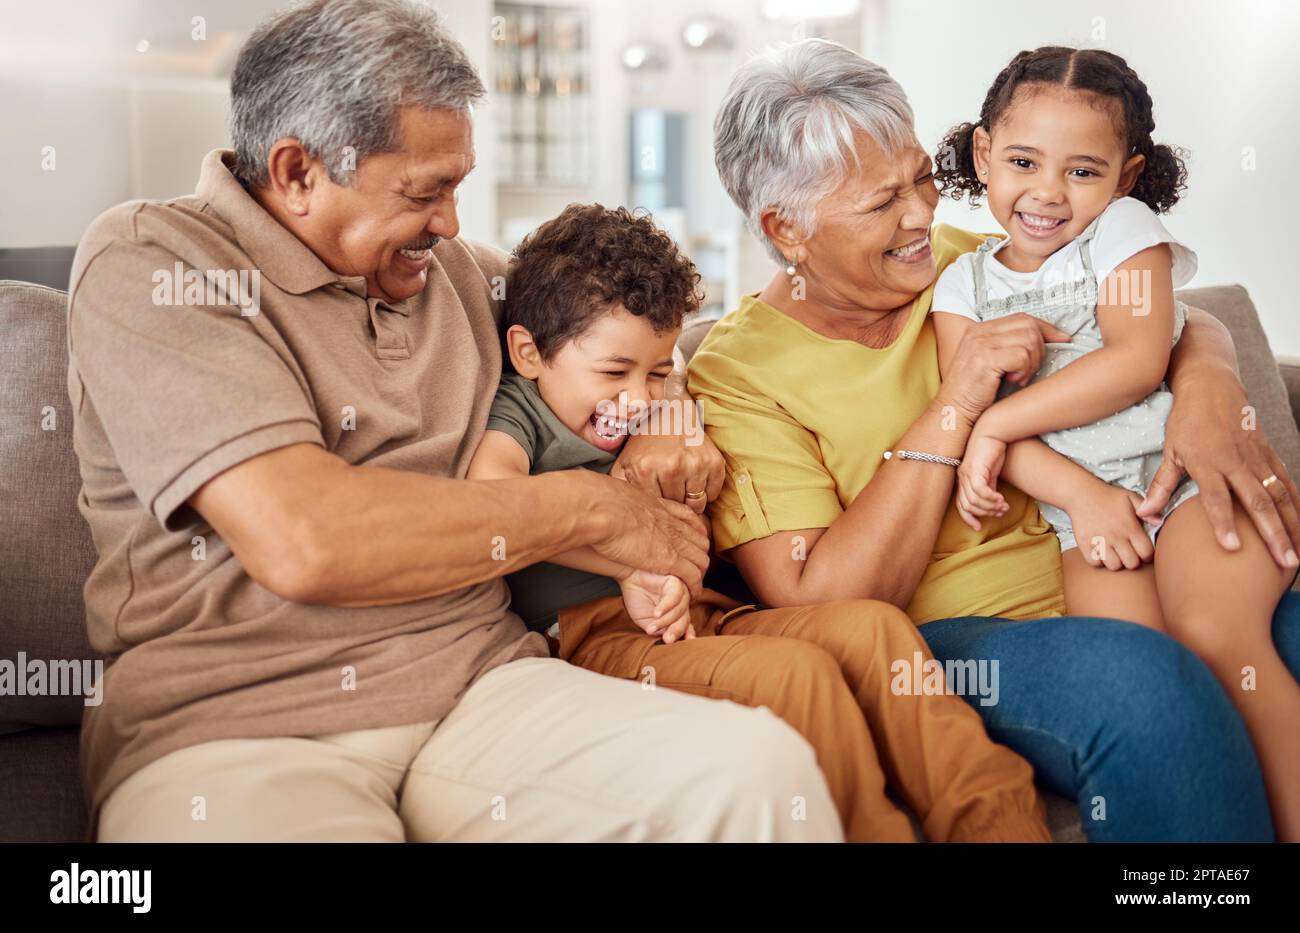 Family, happy and grandparents with children on sofa playing tickle game for bonding fun in home. Love, care and joyful smile together in Mexico famil Stock Photo